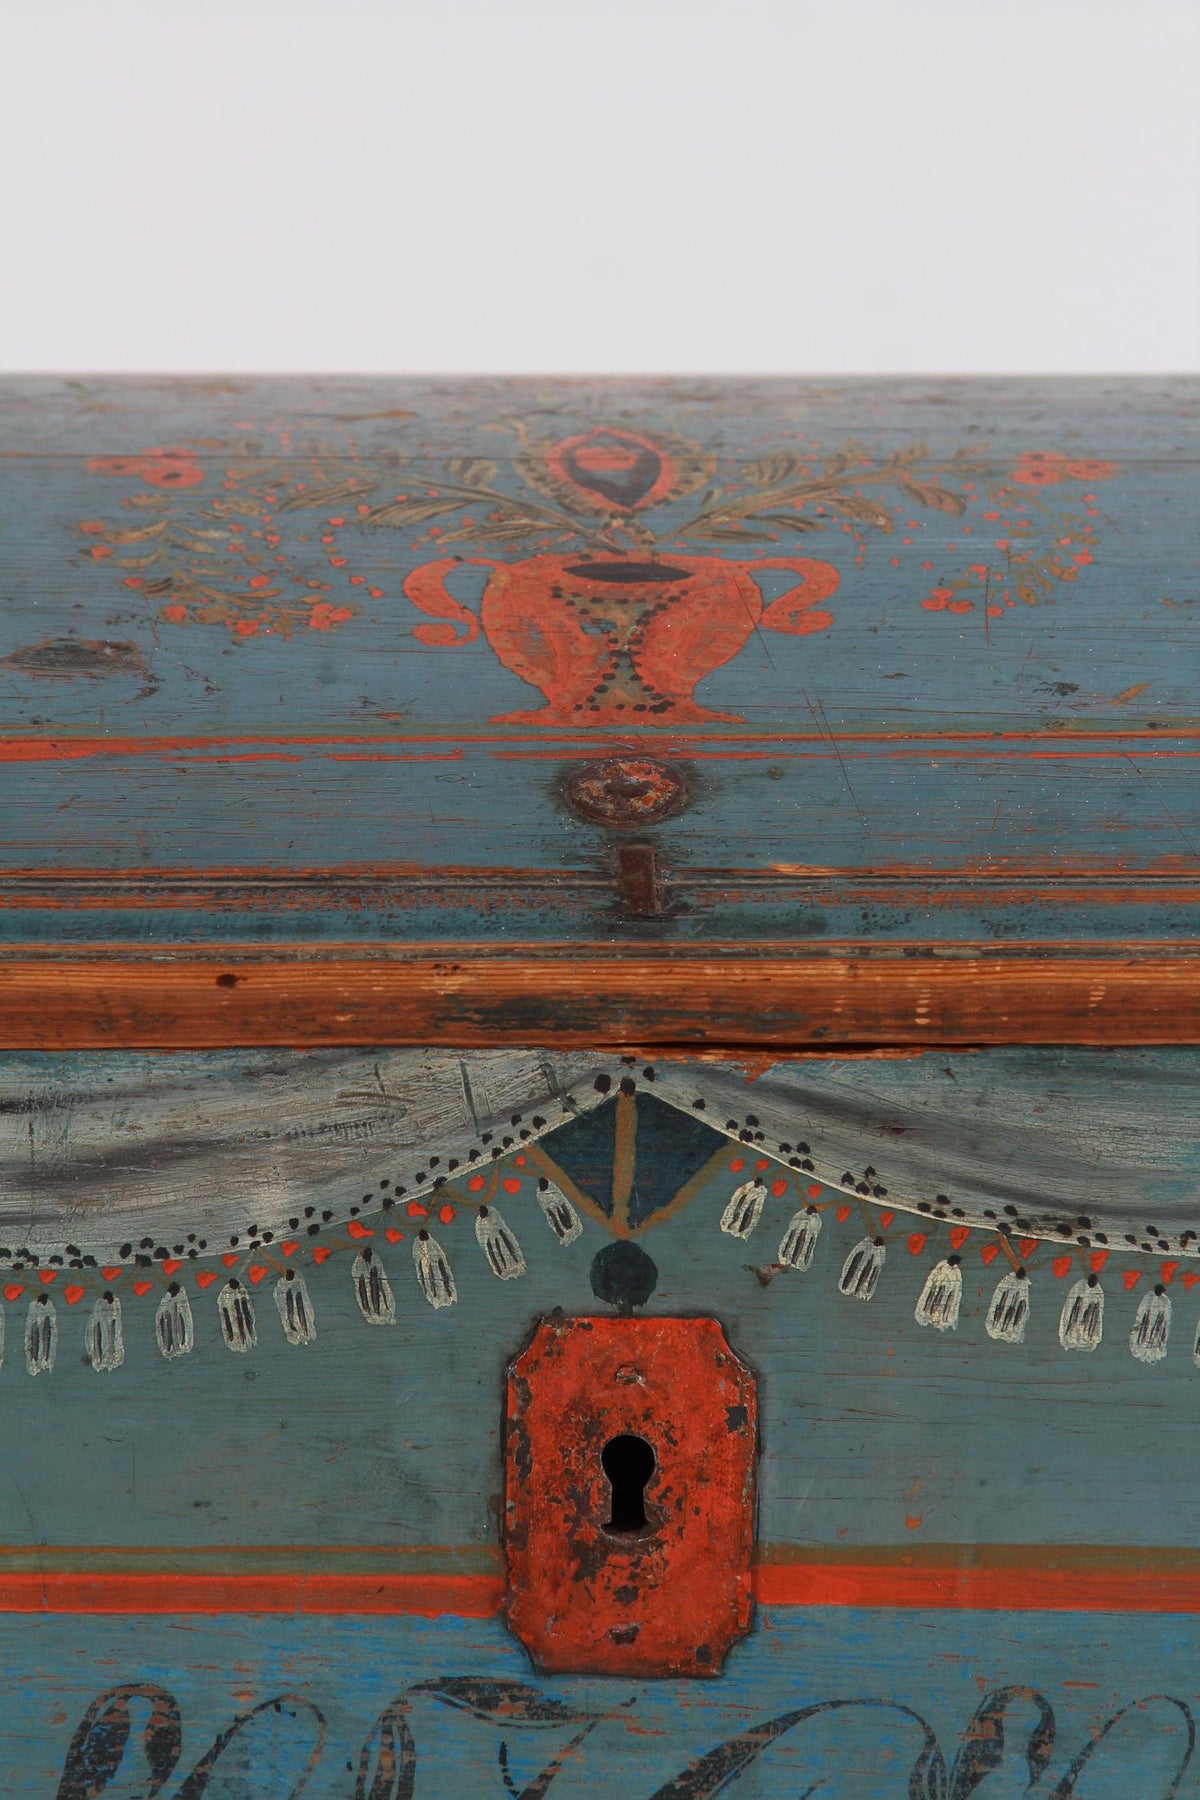 EXCEPTIONAL XL Swedish 19thC Blue Domed Top Trunk DATED  1833